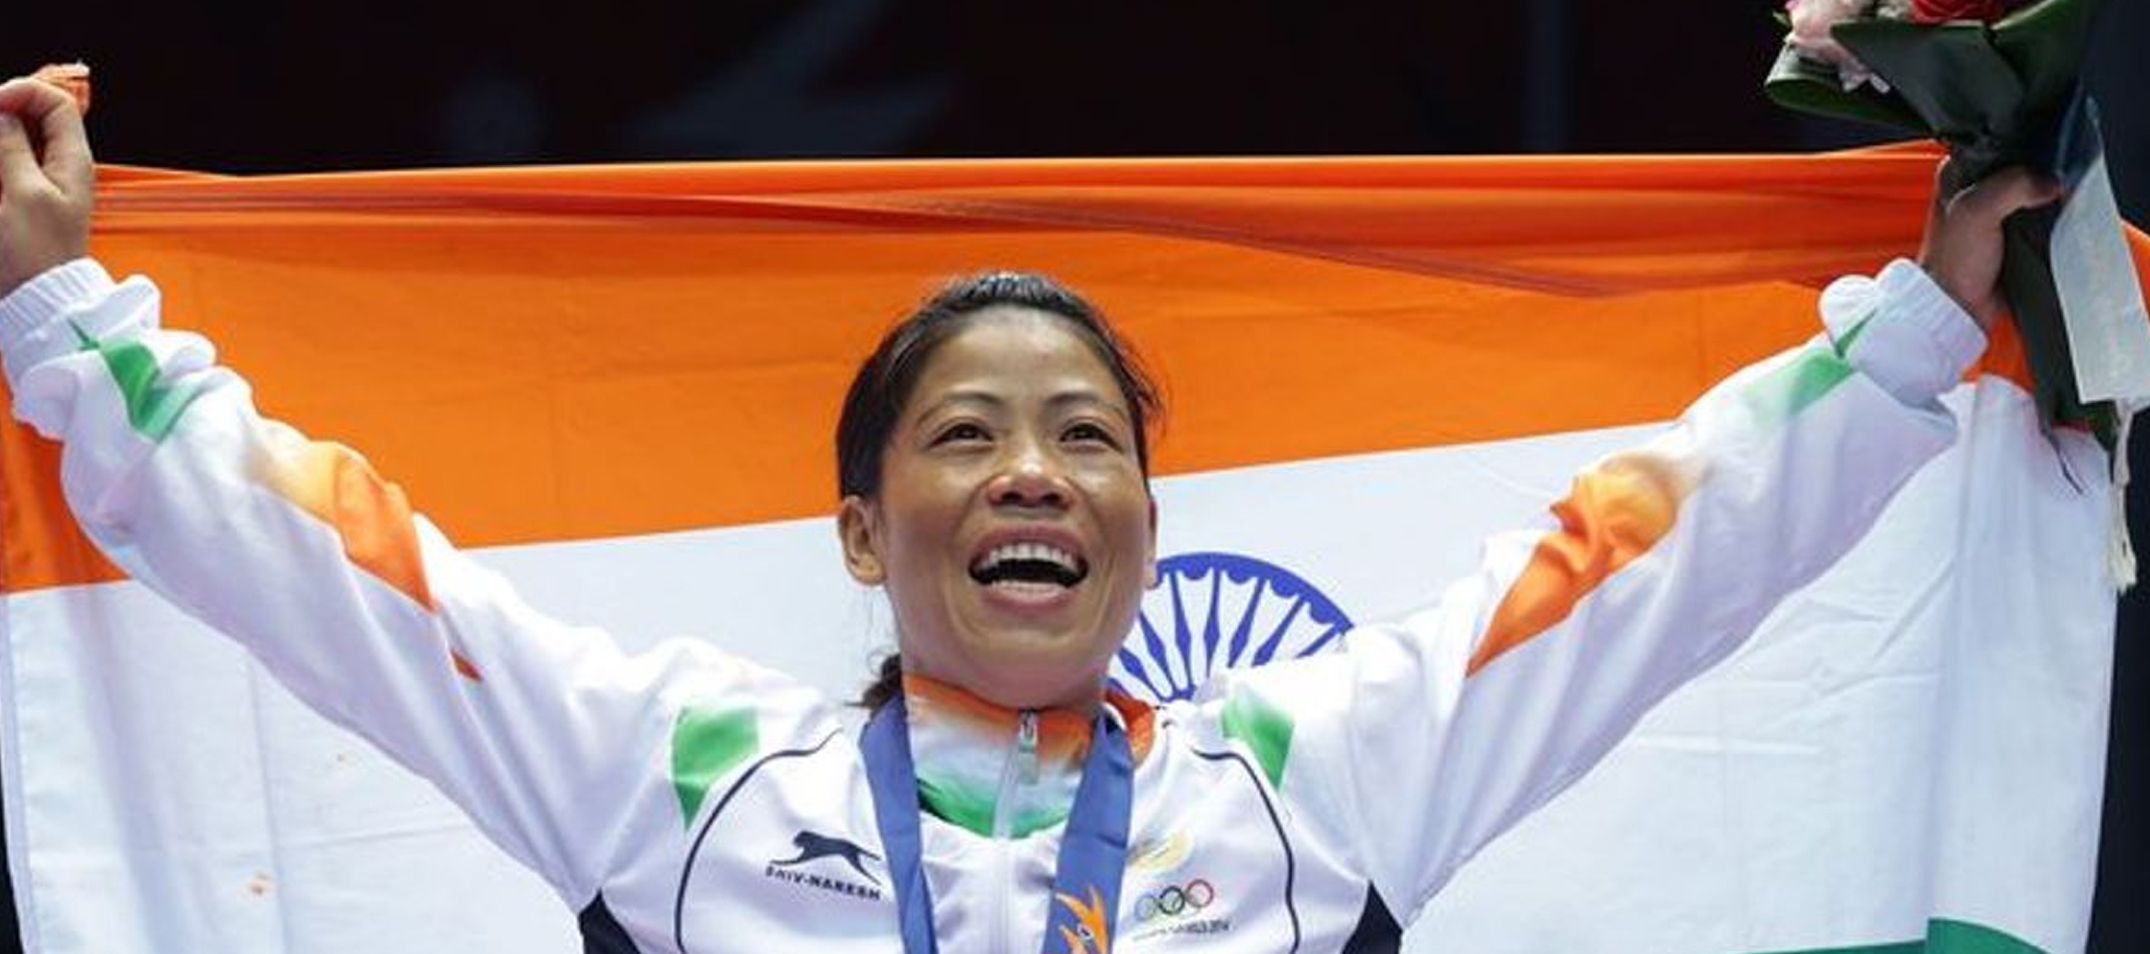 Tokyo Olympics 2020: Mary Kom to represent Asian bloc in athlete ambassadors group